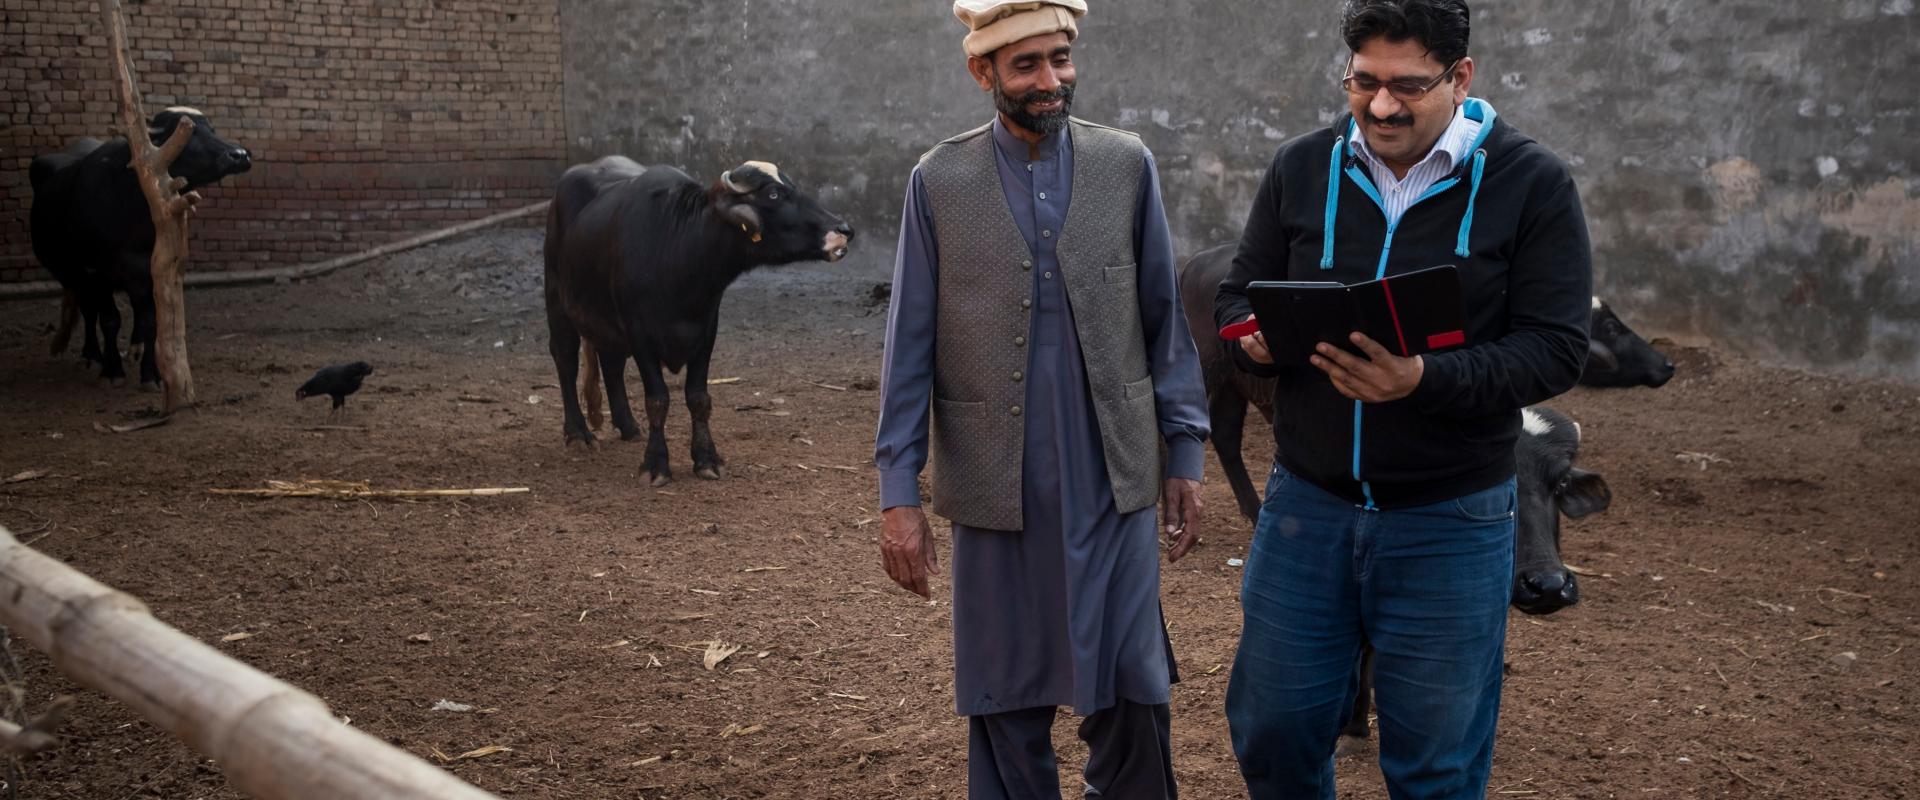 Abdul Aziz interviews Jagiwala farmer Mohammad Hussain during a commcare survey. The AVCCR team have been working in Jaguwala village for a number of years and due to their close relationships with farmers they conducted the pilot test of their commcare surveys with the farmers of Jaguwala village. Abdul attended the MAD Masterclass in Canberra in June 2016 and is the app manager for commcare on the dairy project in Pakistan.